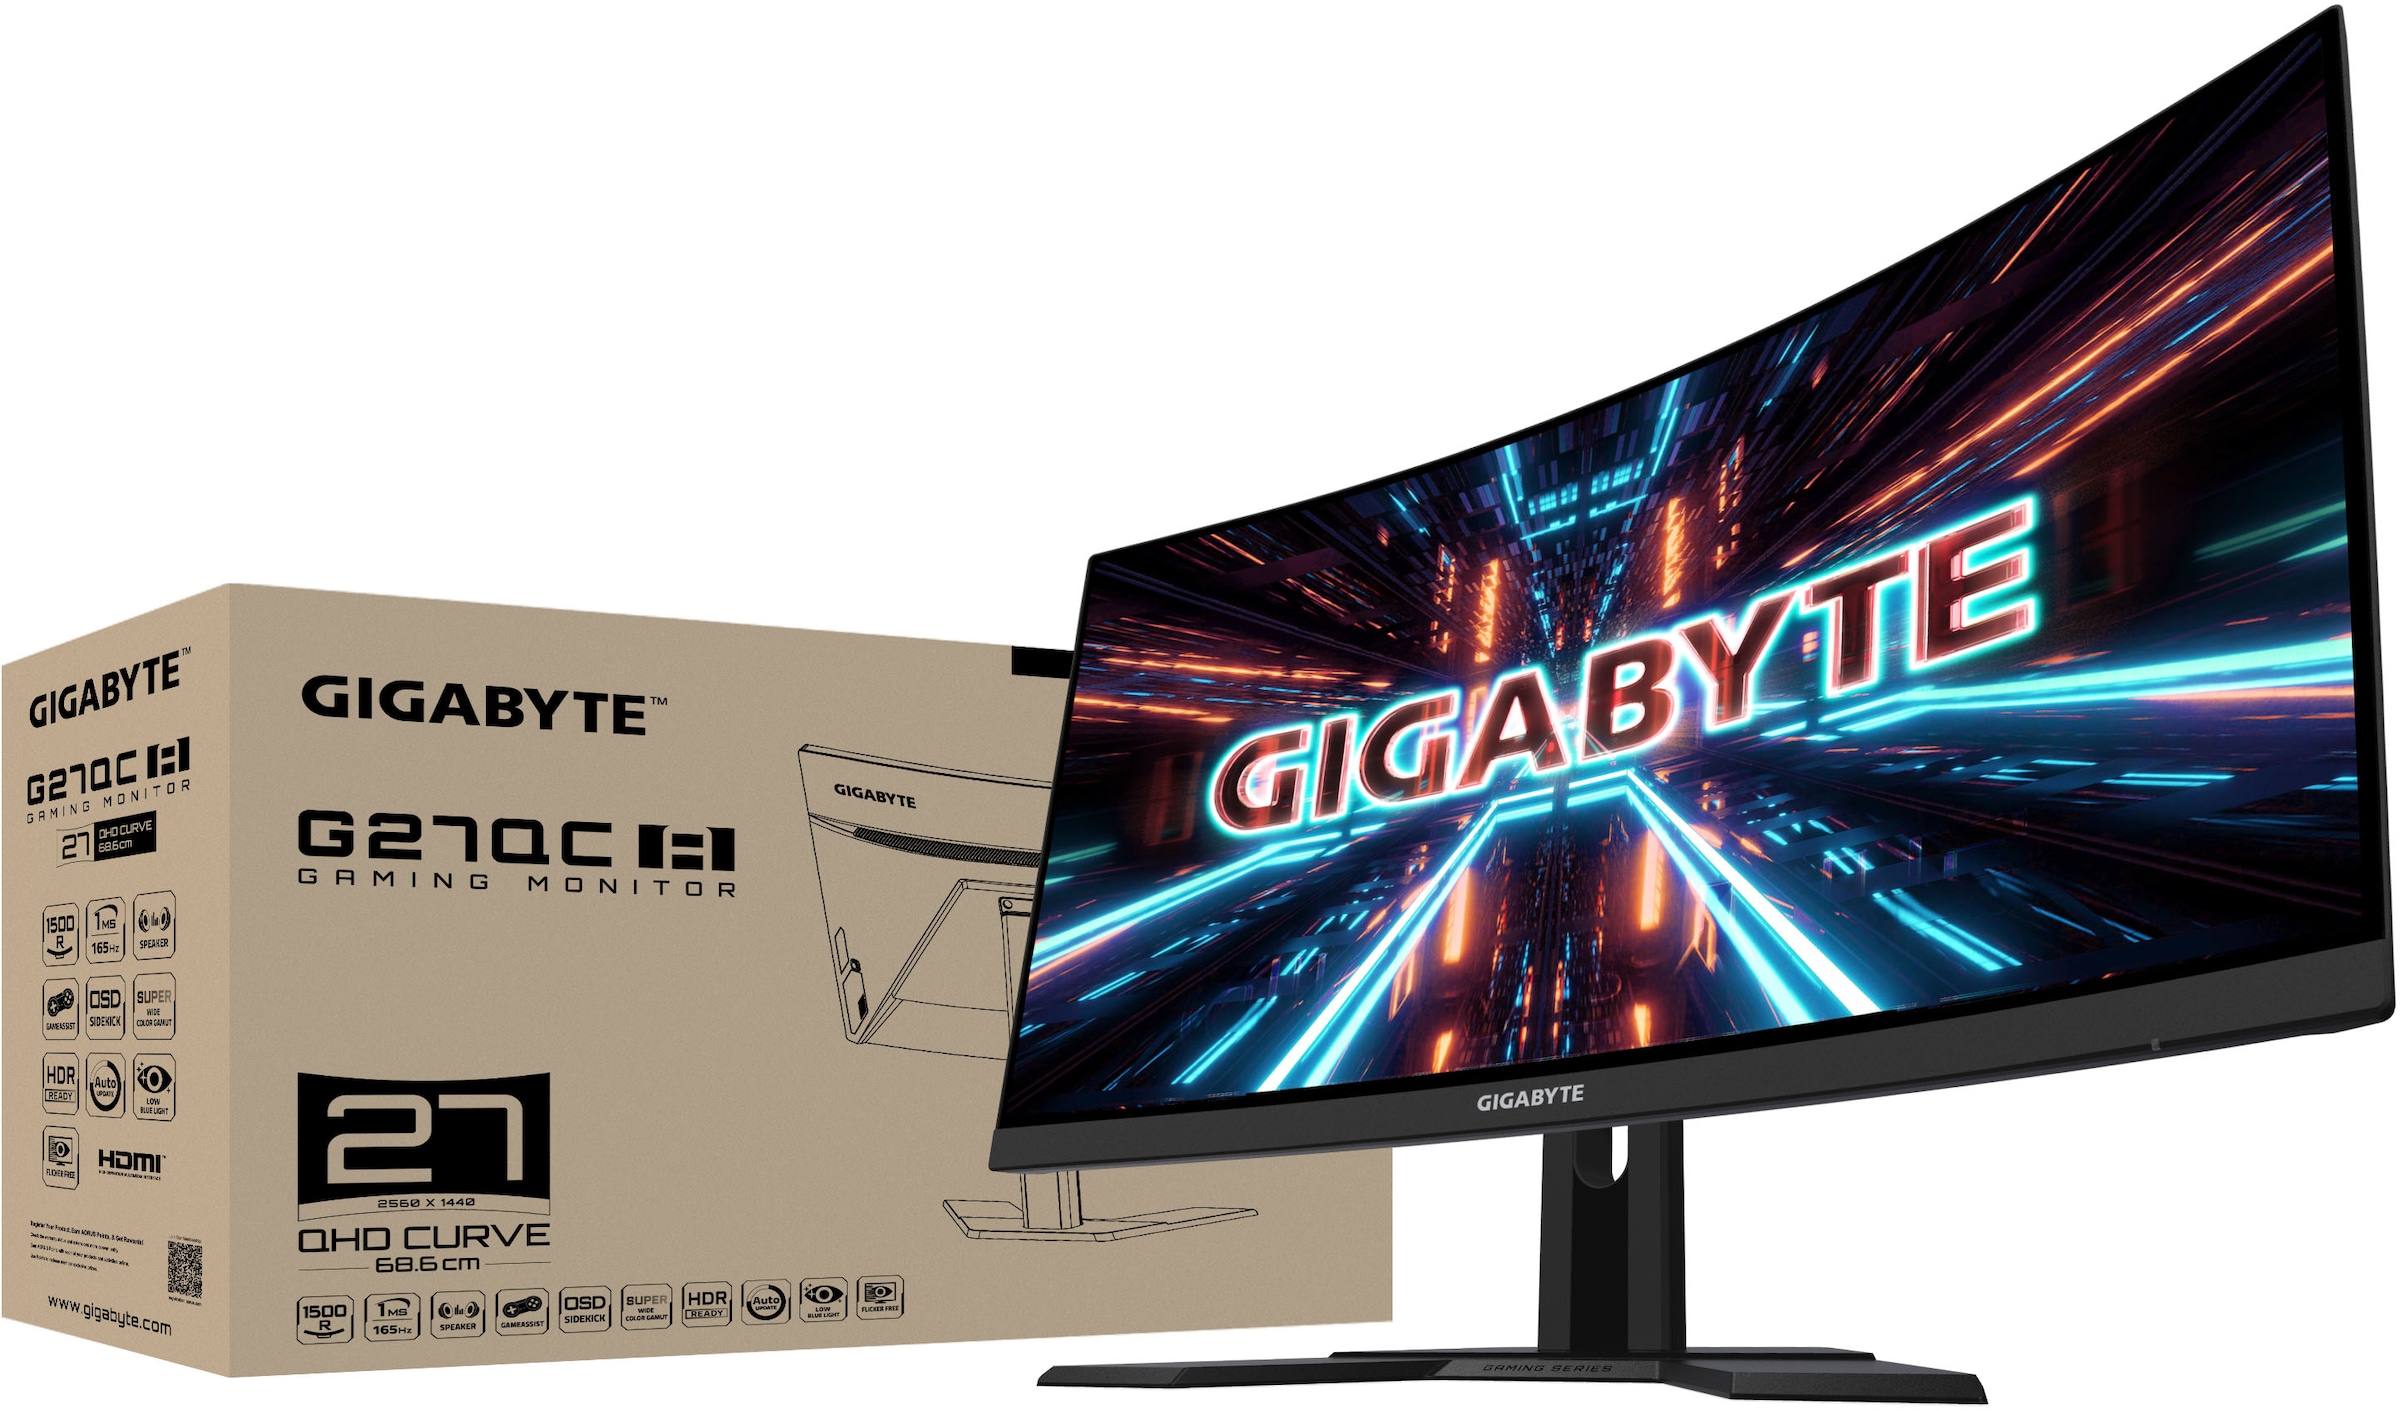 Gigabyte Curved-Gaming-Monitor »G27QC 2560 Reaktionszeit, QHD, A«, 1 px, cm/27 68,5 bei 1440 165 ms Zoll, OTTO jetzt Hz x